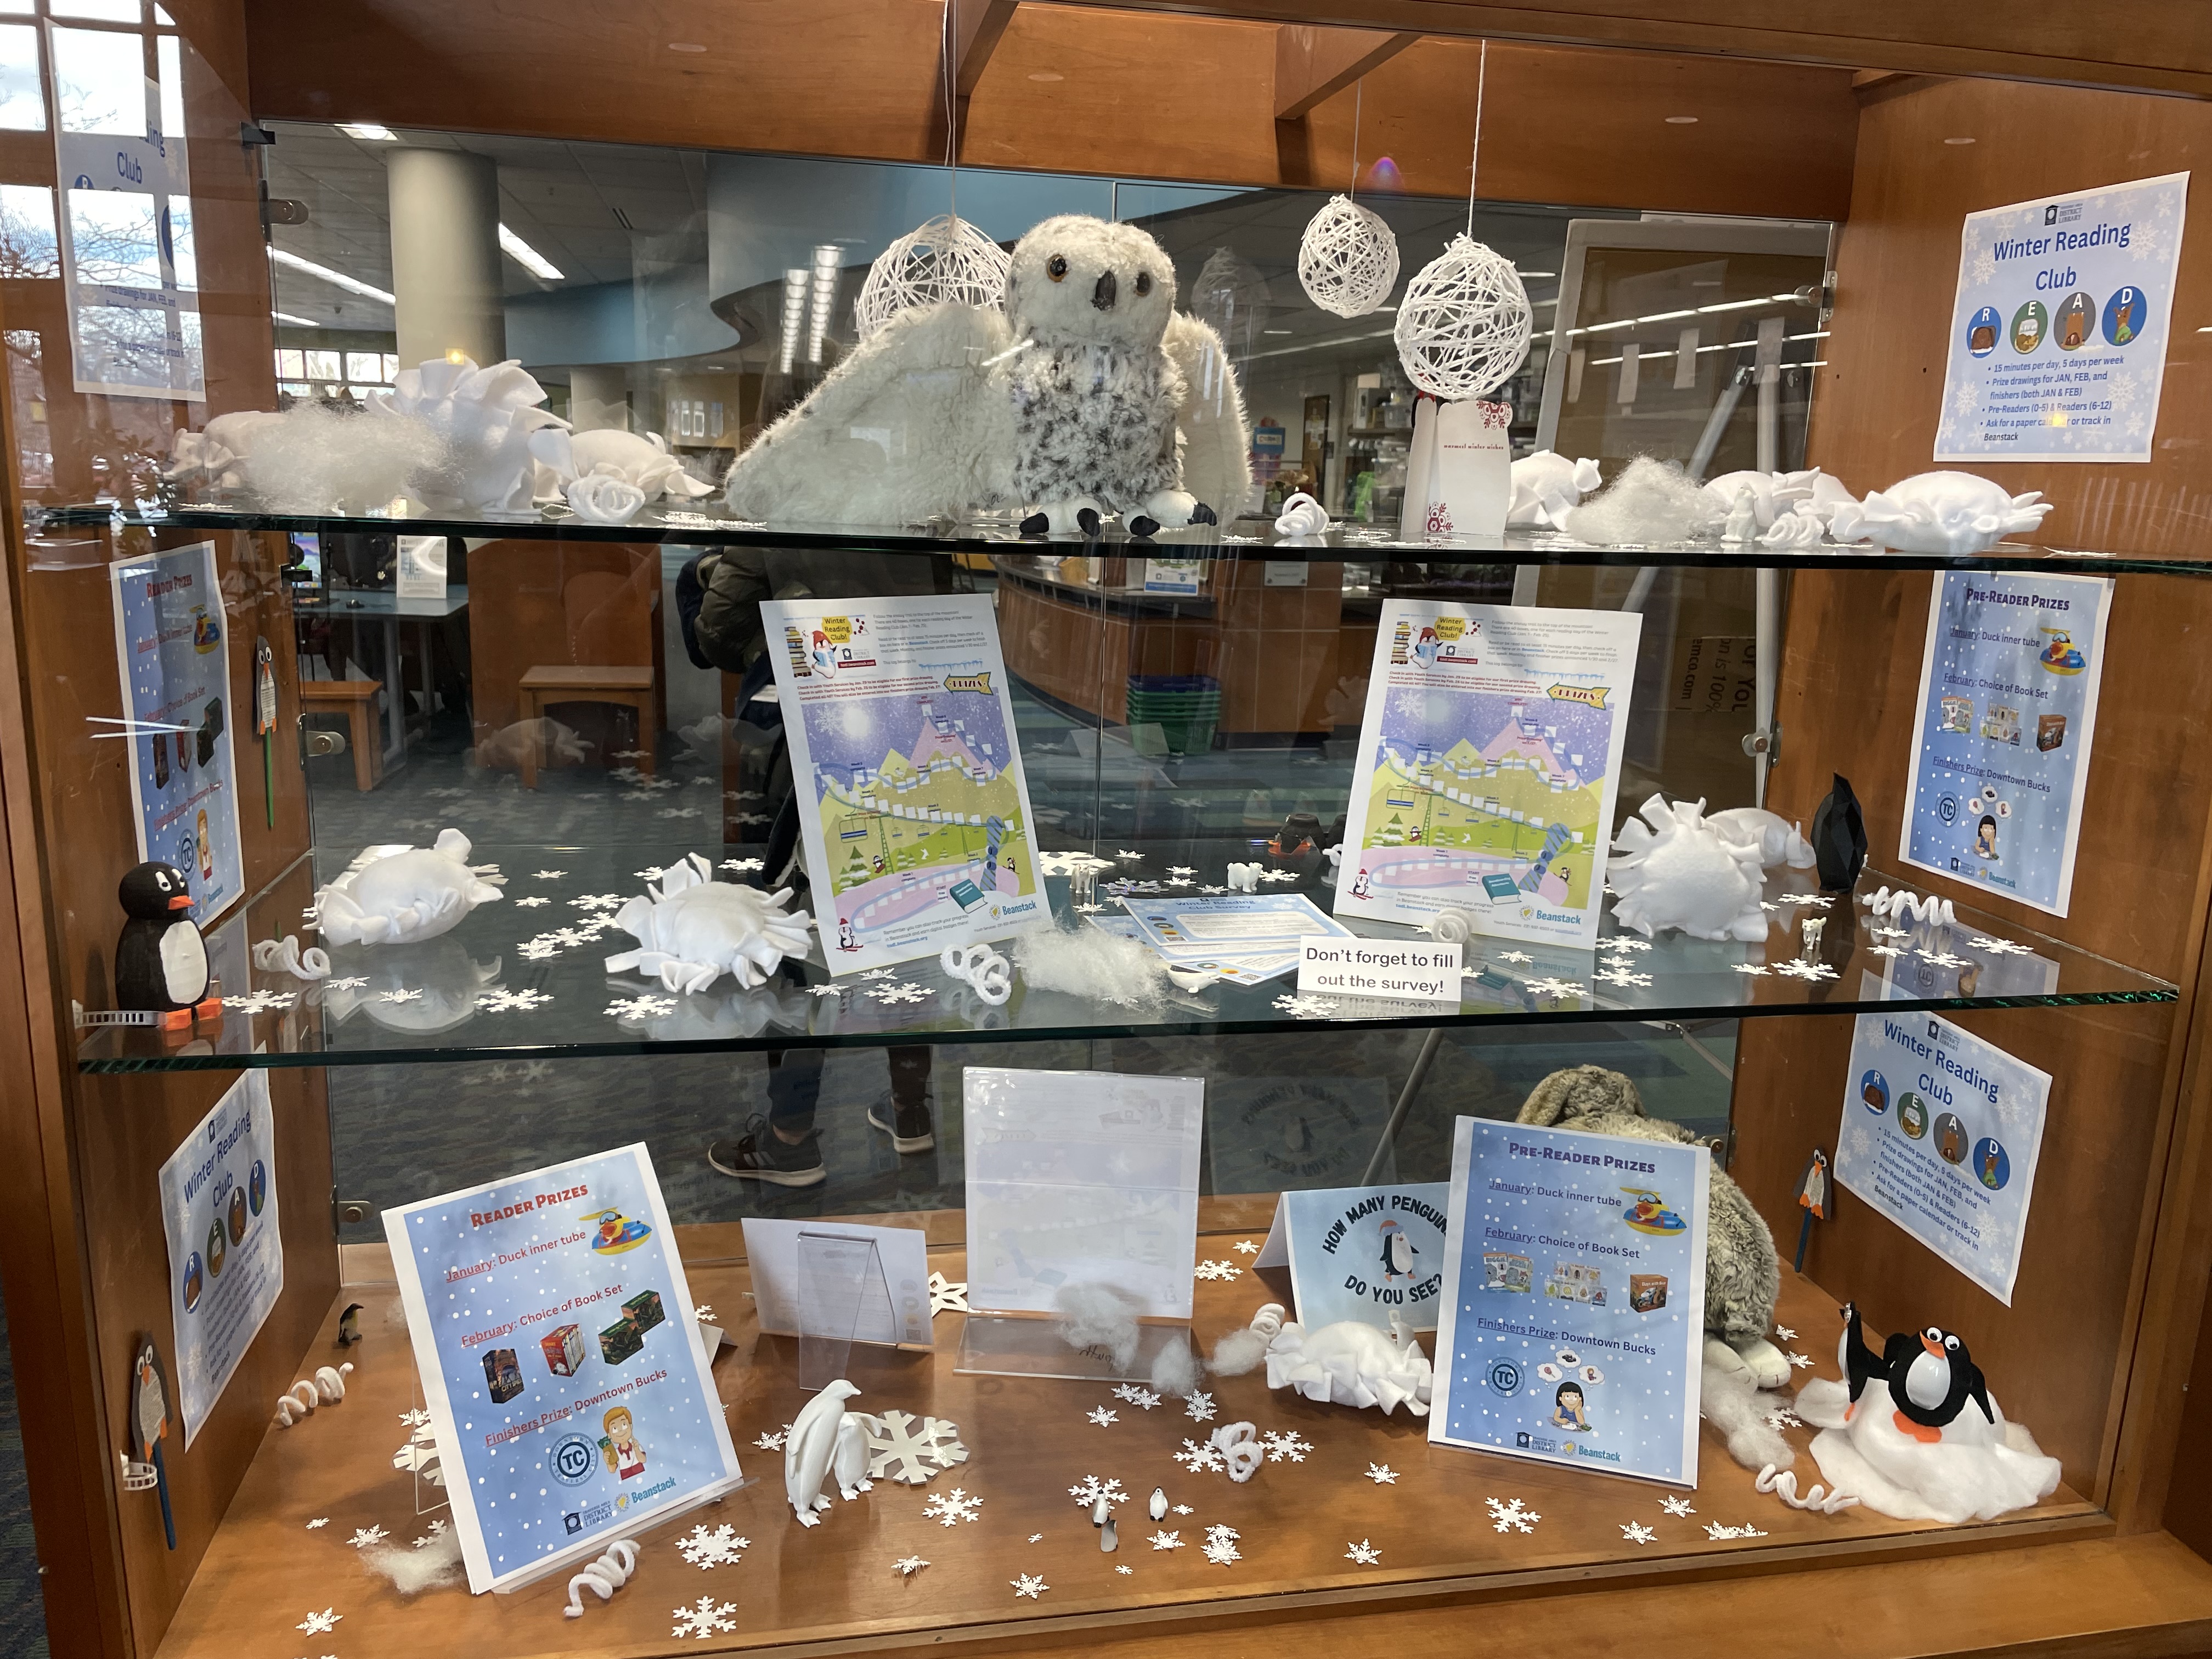 Display promoting winter reading club with a stuffed snow owl